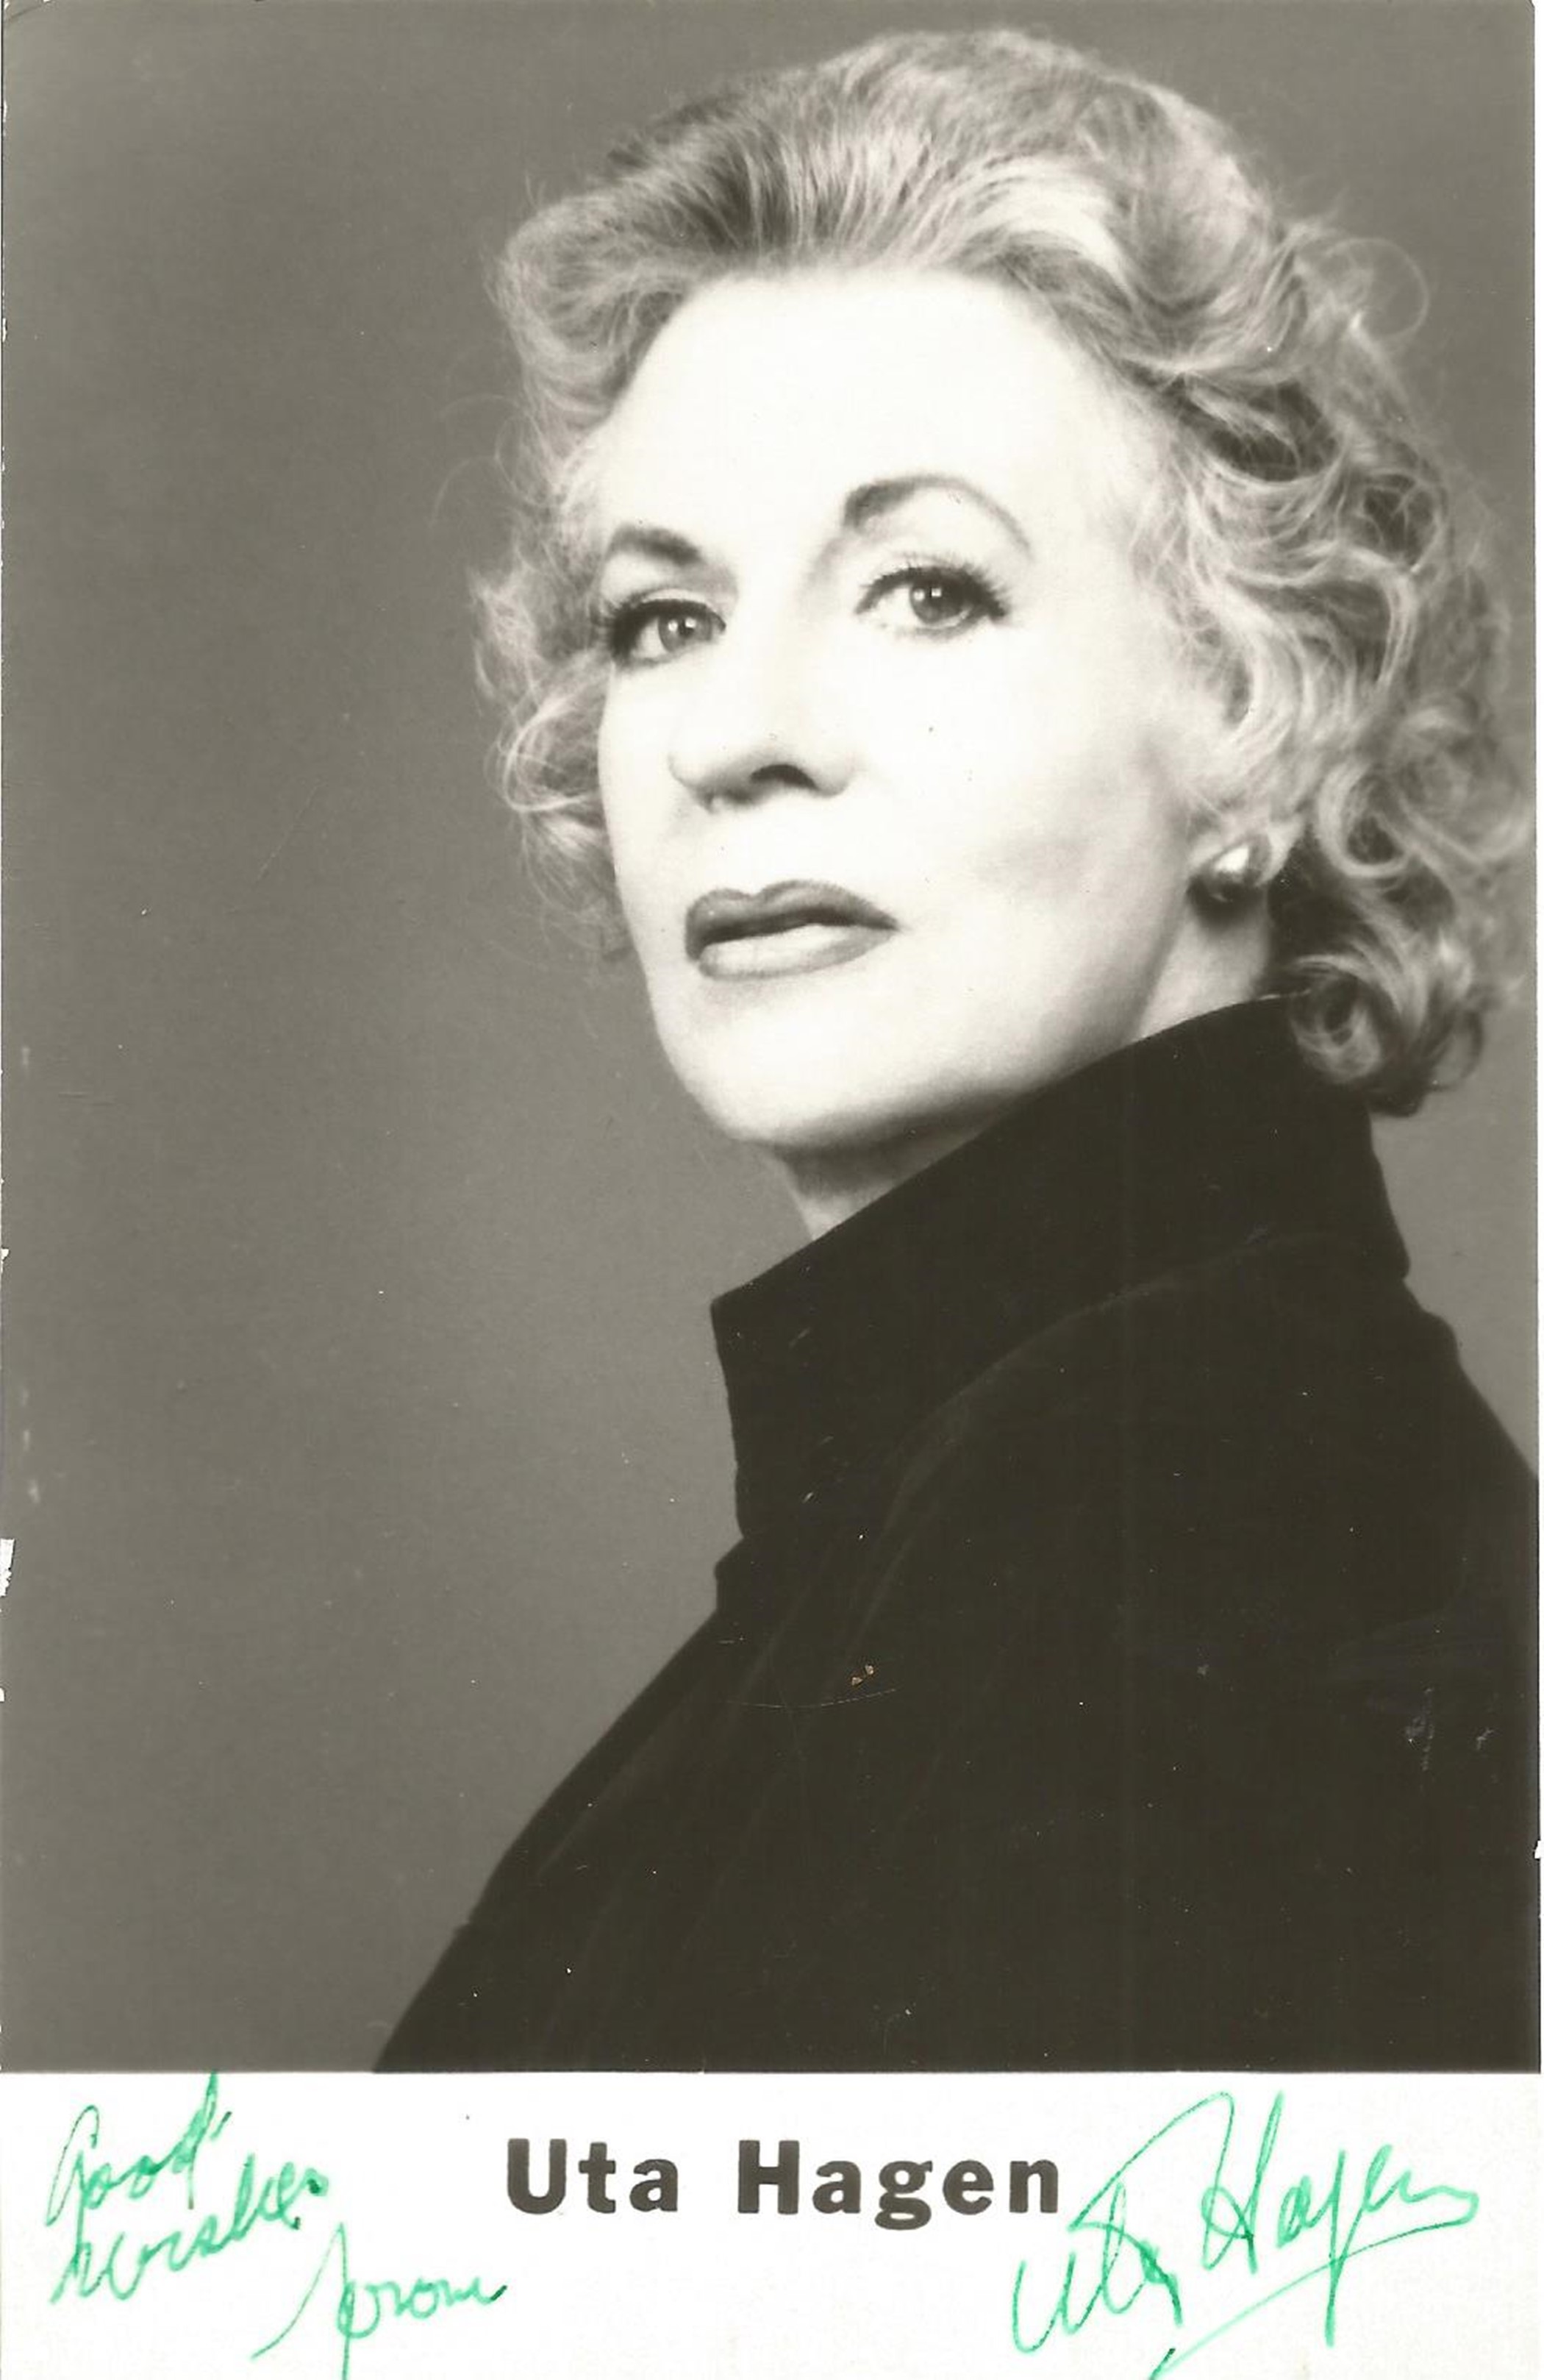 Uta Hagen signed 6x4 black and white photograph. Uta was a German actress who was elected to the